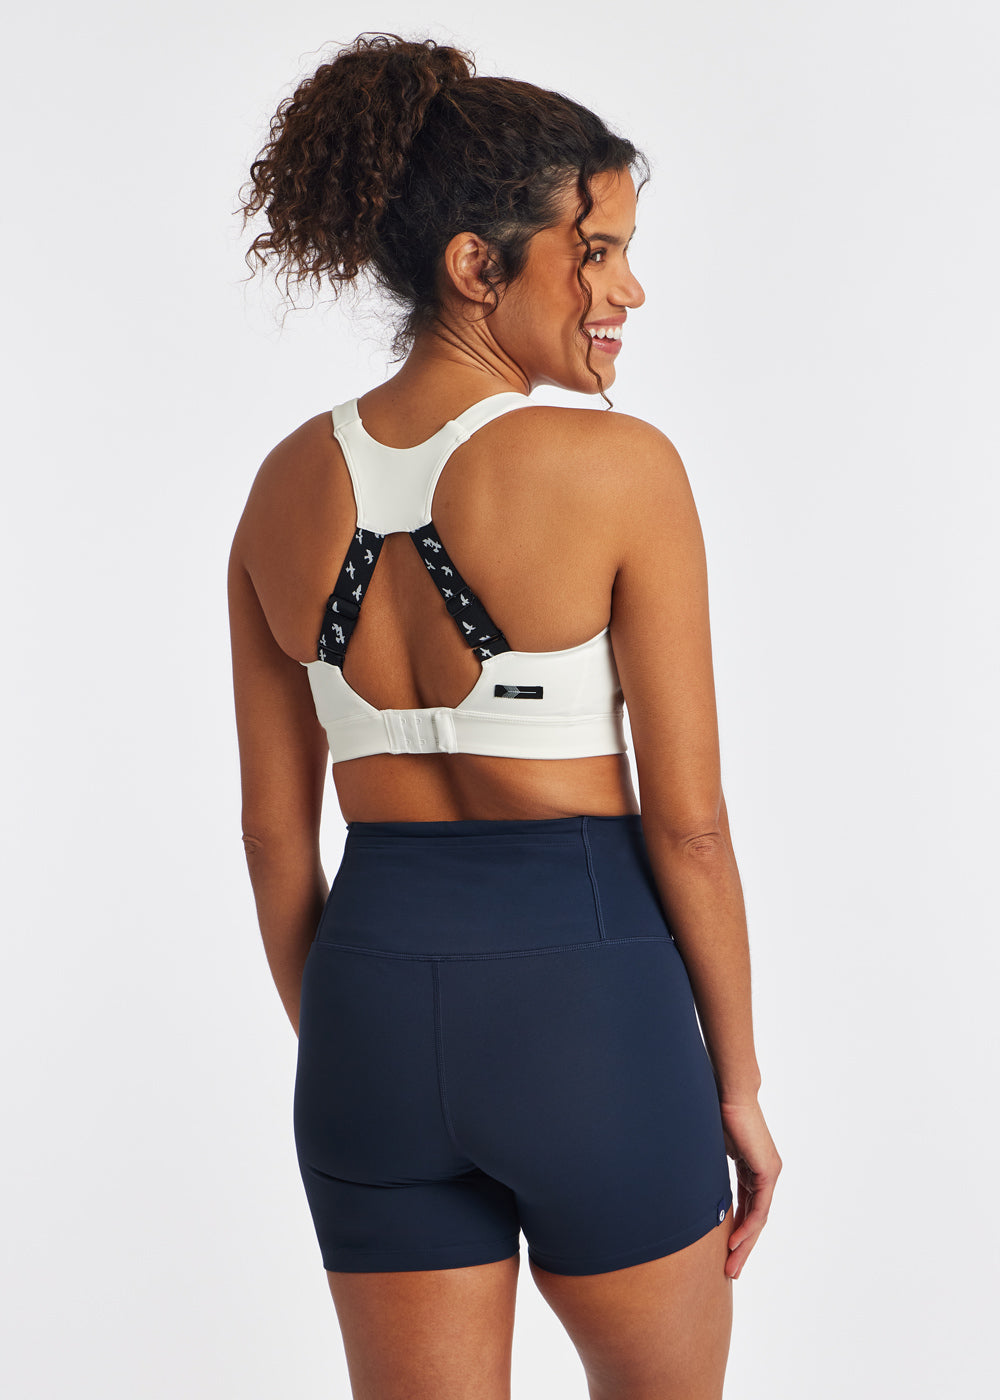 Top 5 Benefits a Sports Bra - Unleash Your Workout